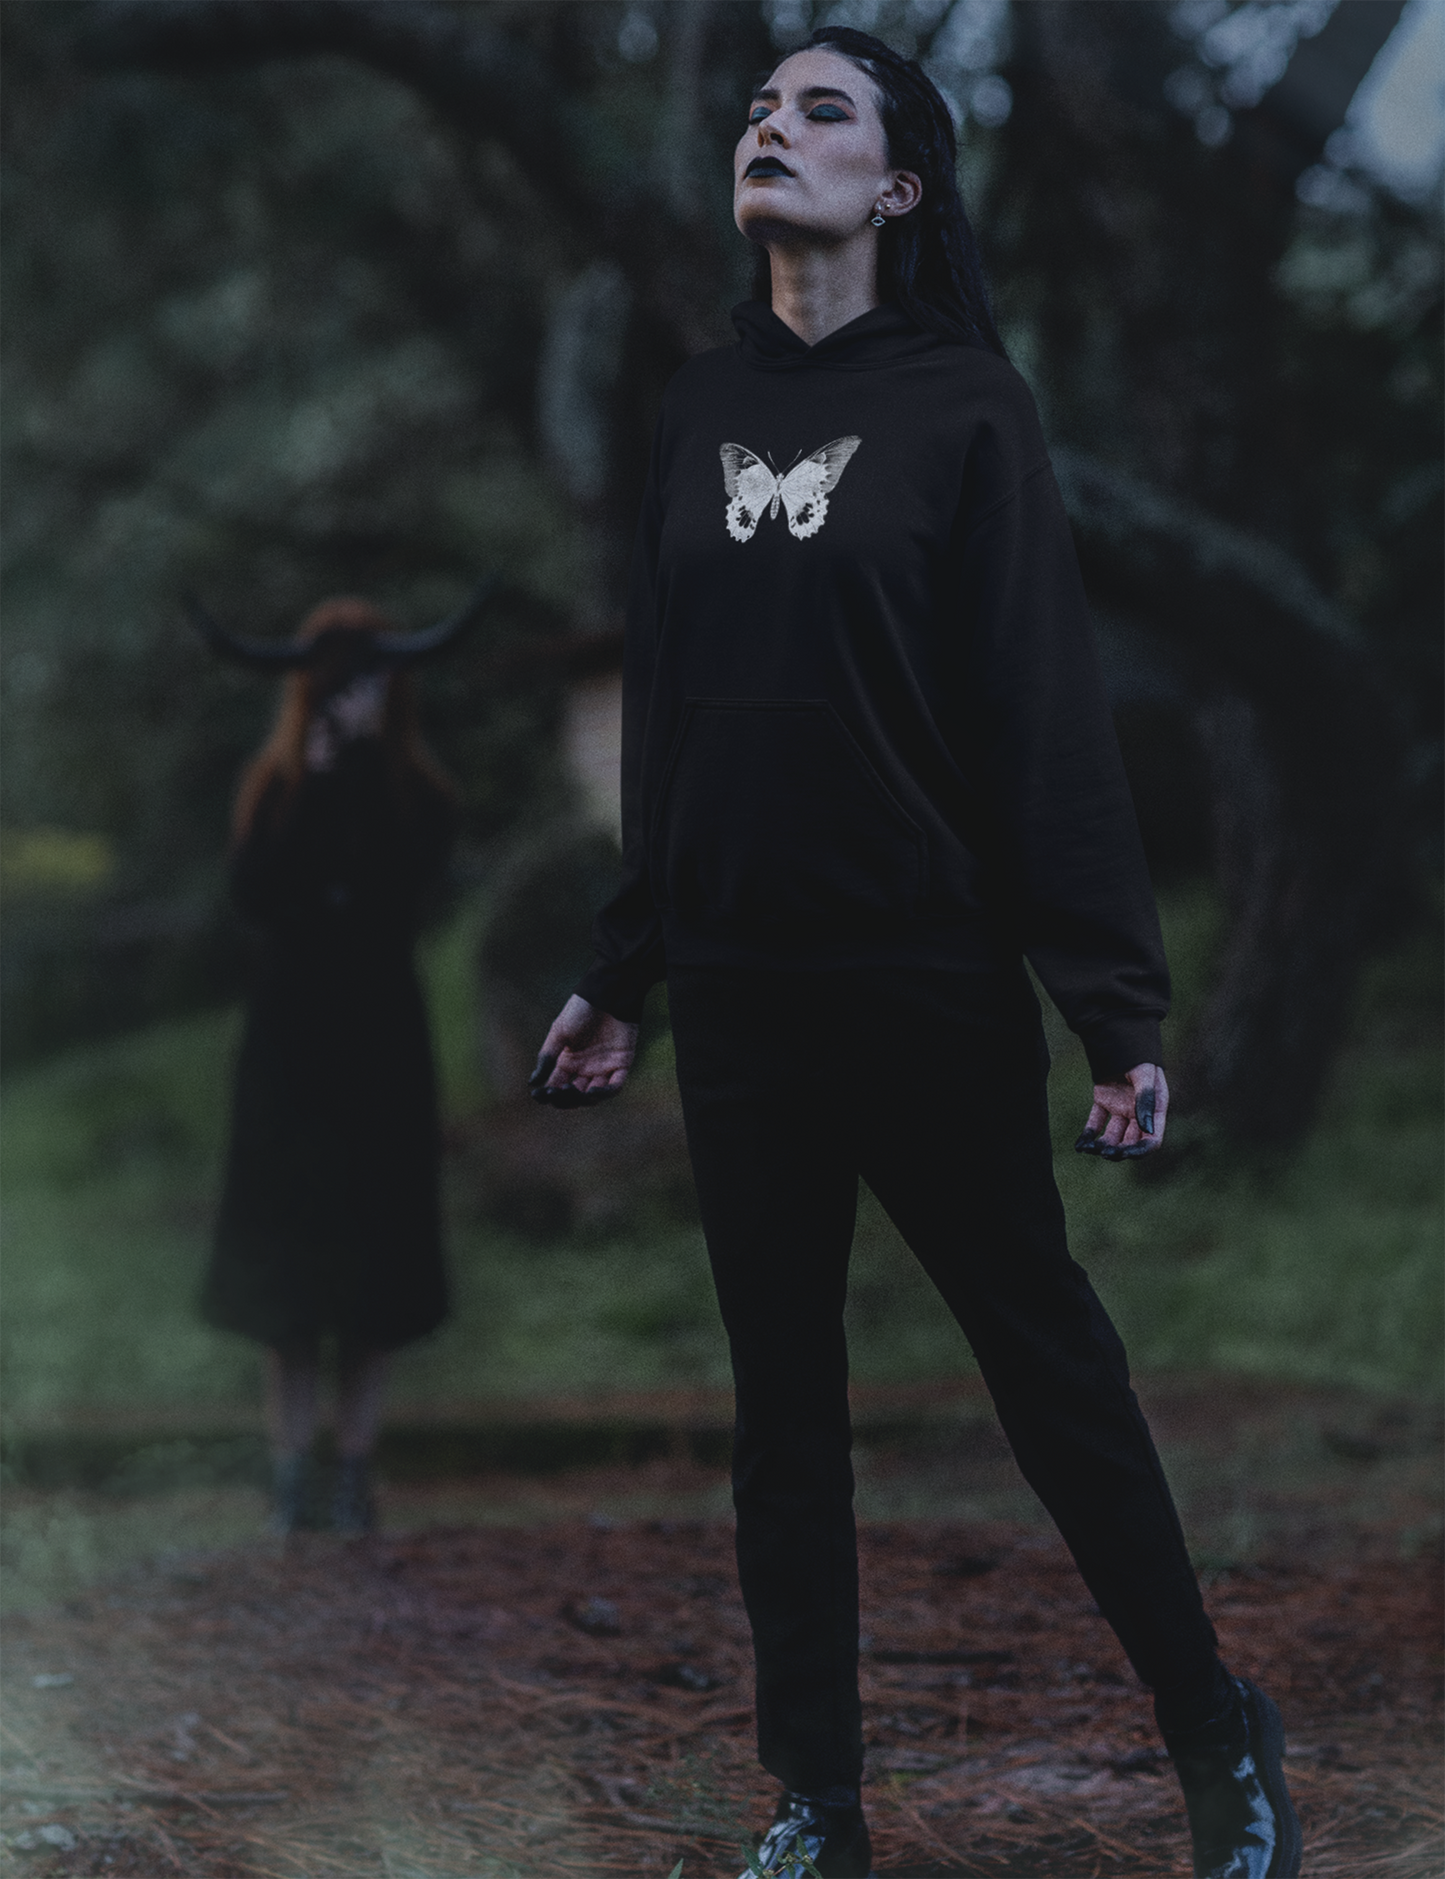 Plus Size Goth Witchy Butterfly Occult Hoodie